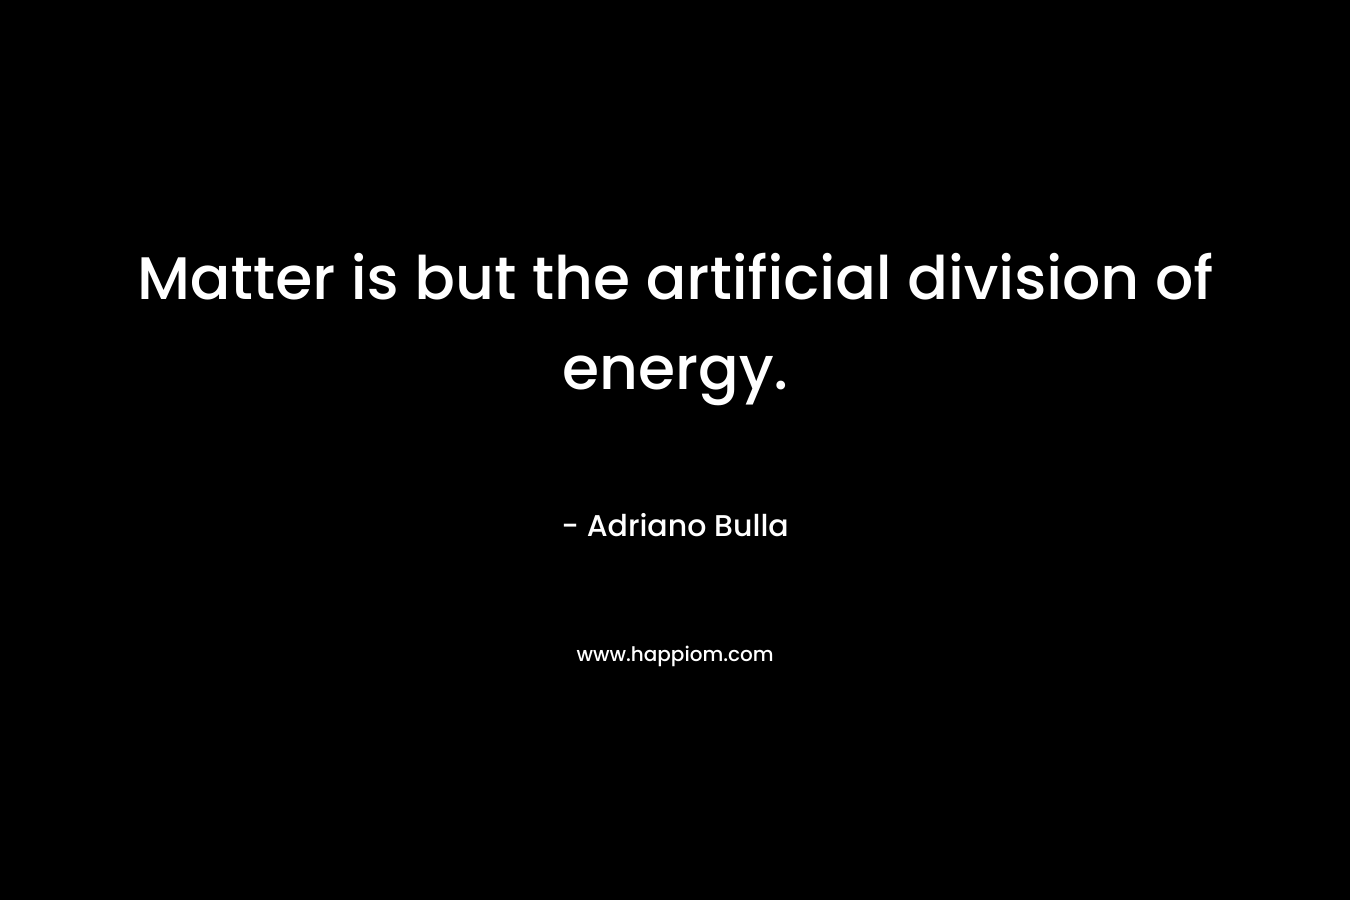 Matter is but the artificial division of energy. – Adriano Bulla